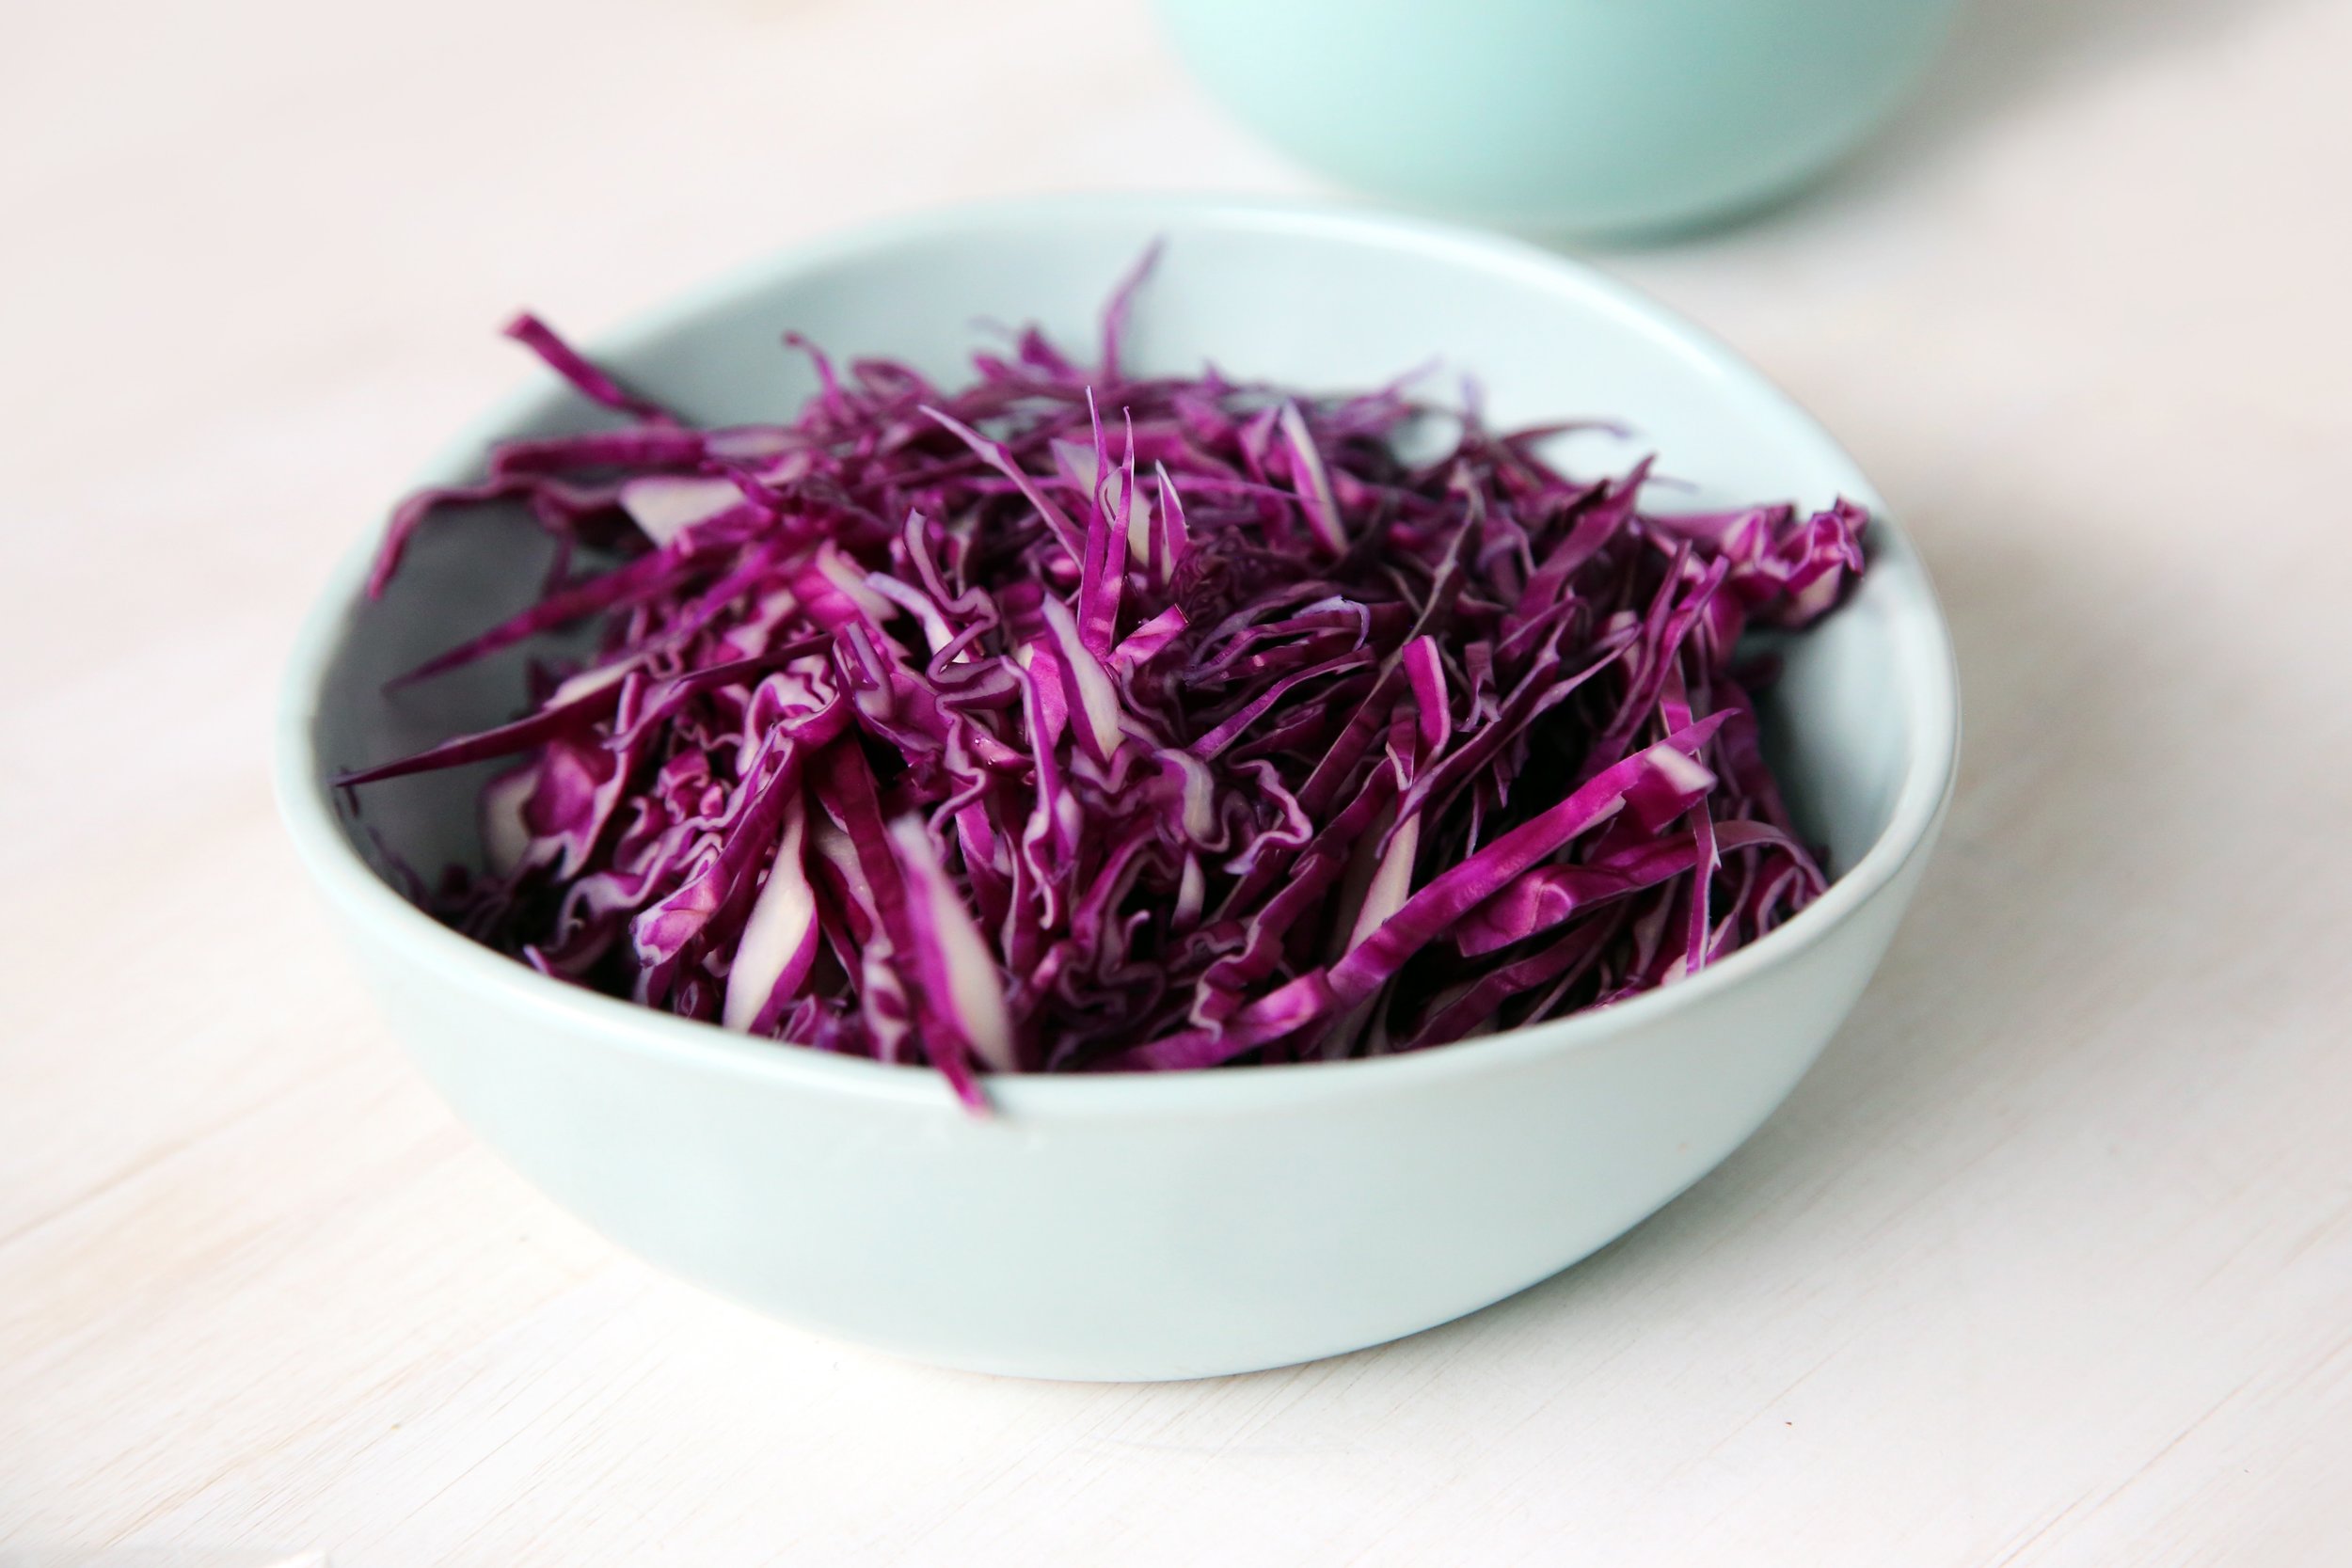 Shredded cabbage is another prepped favorite!